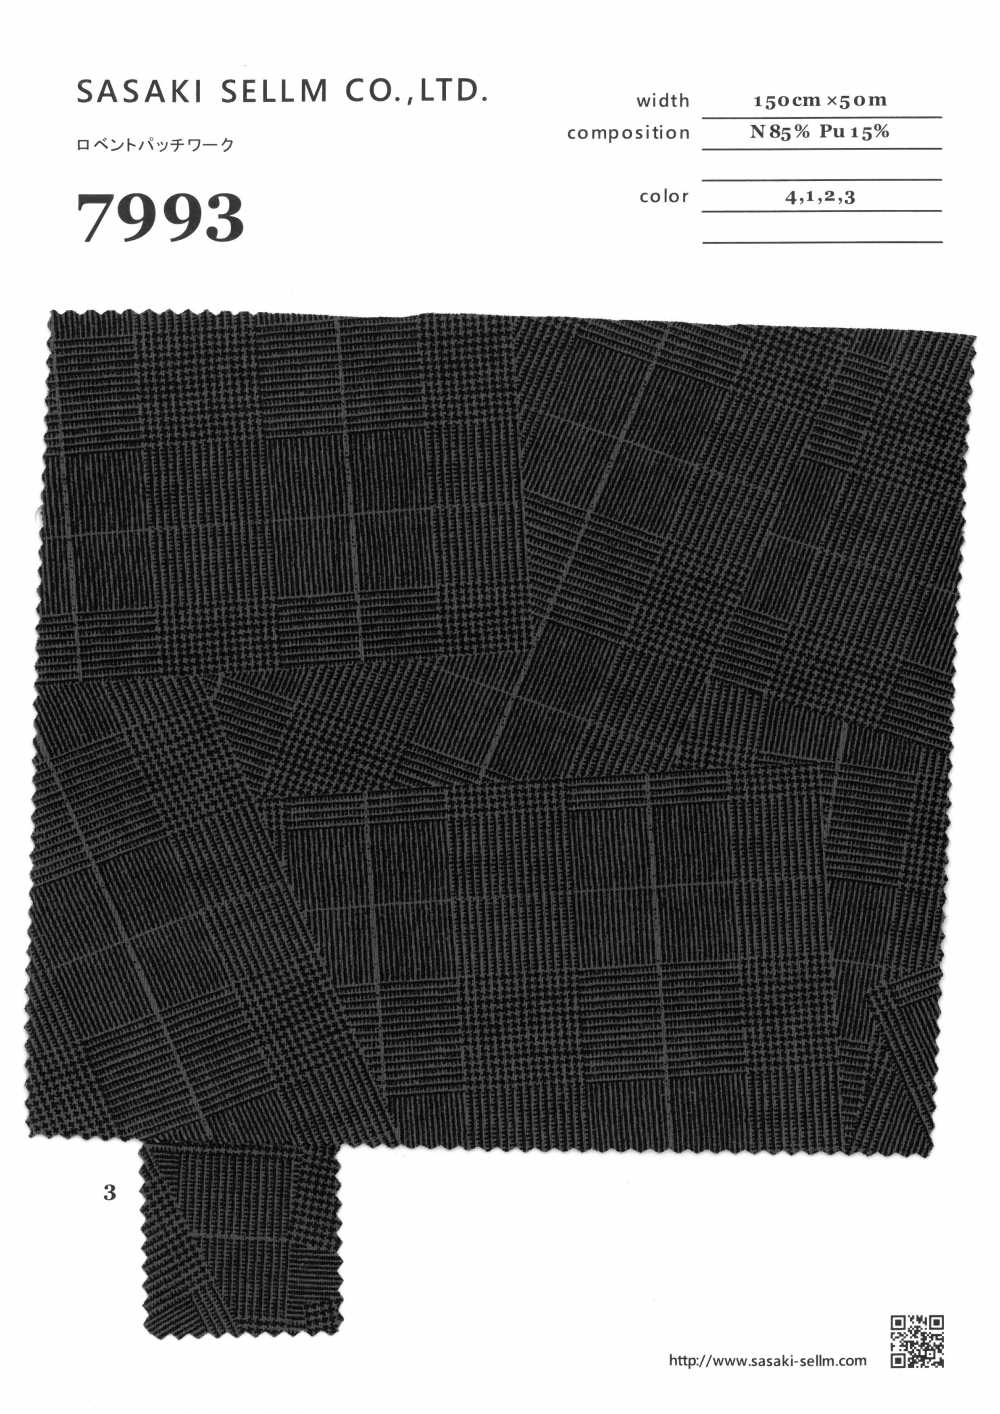 7993 Lovent Patchwork[Textile / Fabric] SASAKISELLM